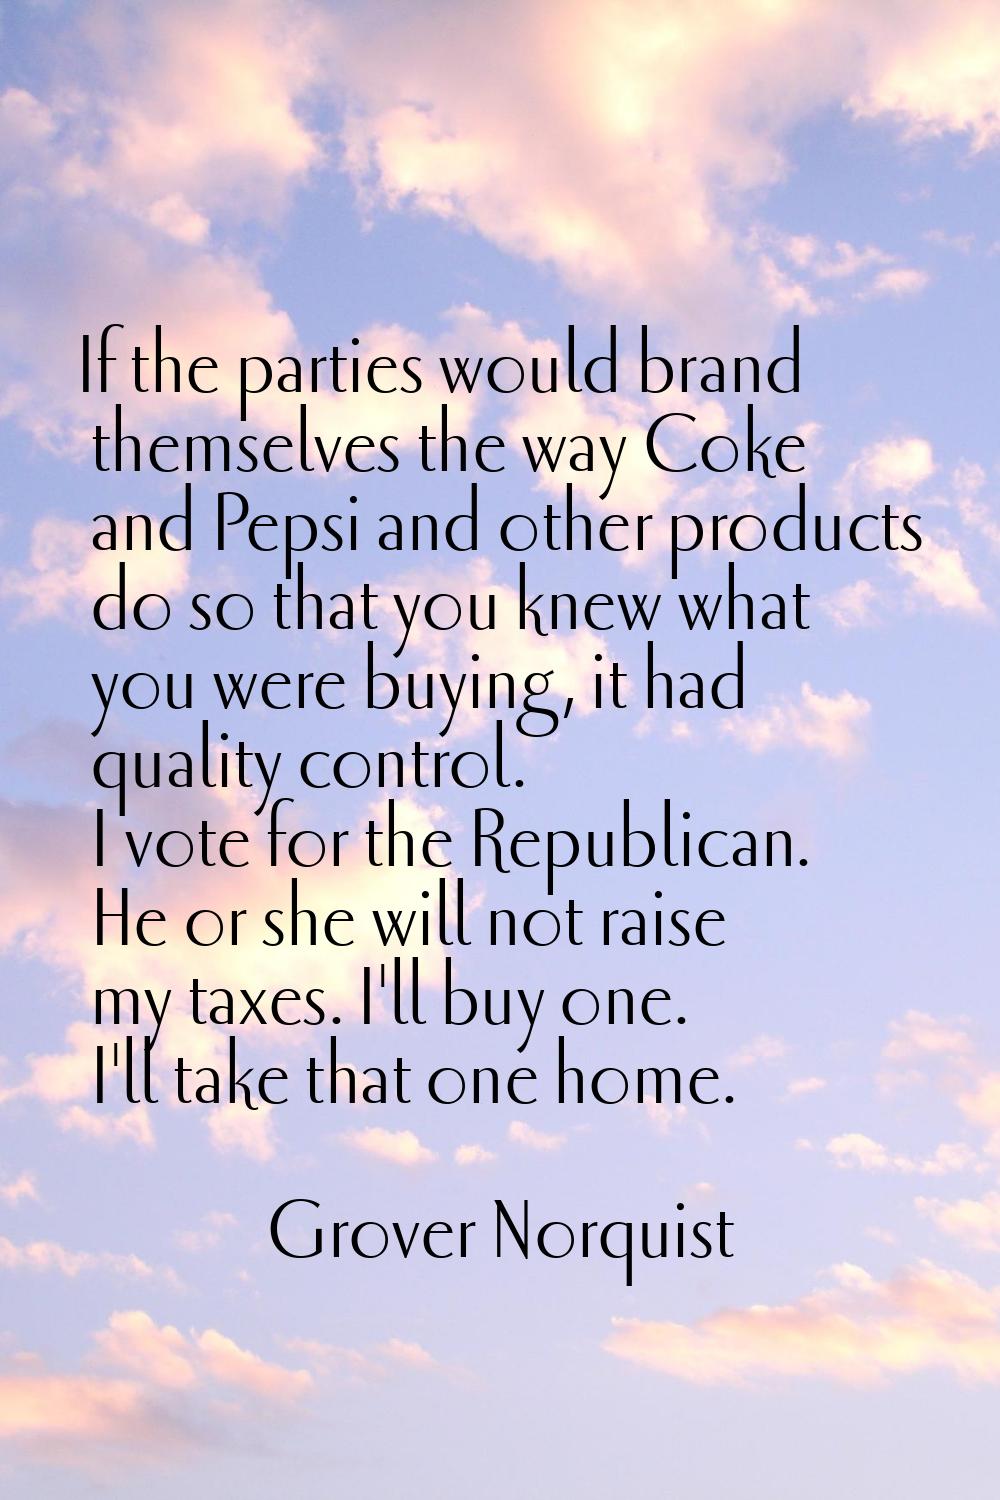 If the parties would brand themselves the way Coke and Pepsi and other products do so that you knew